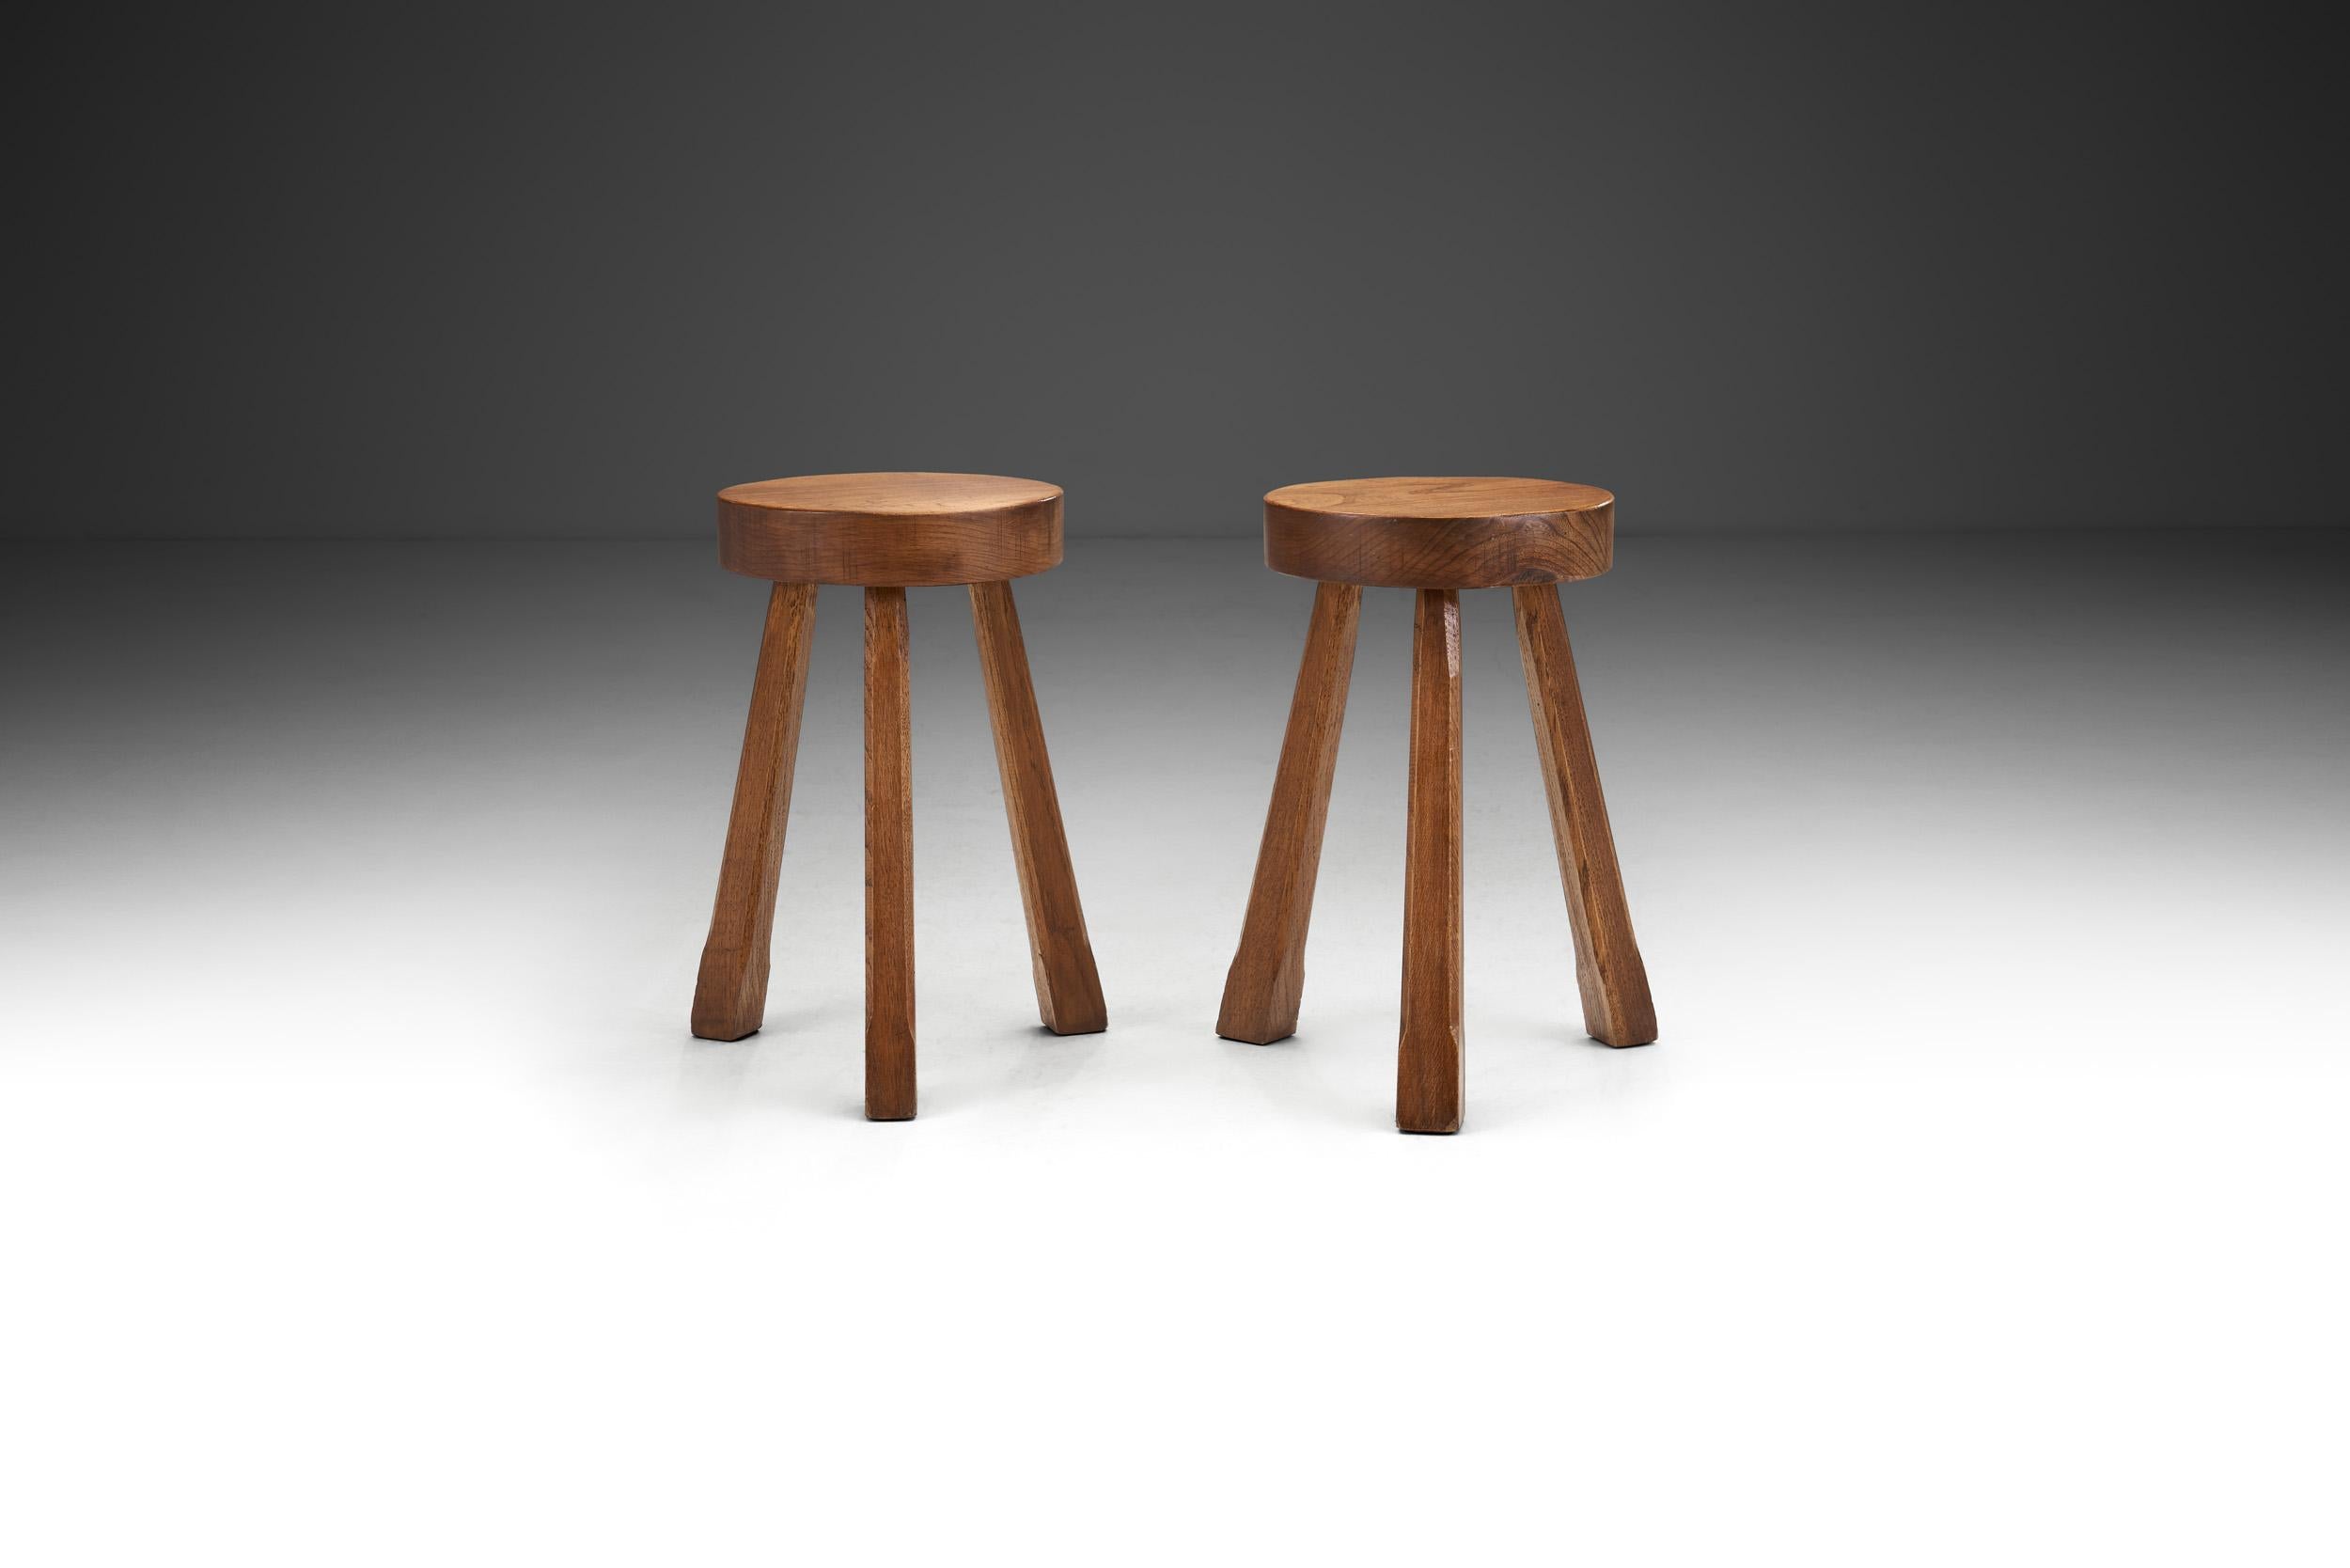 This pair of stools could be described with the often used terms of “brutalist” or “wabi sabi”. What connects both terms is the focus on the material’s natural qualities. The appreciation of rustic simplicity and craftsmanship has never completely